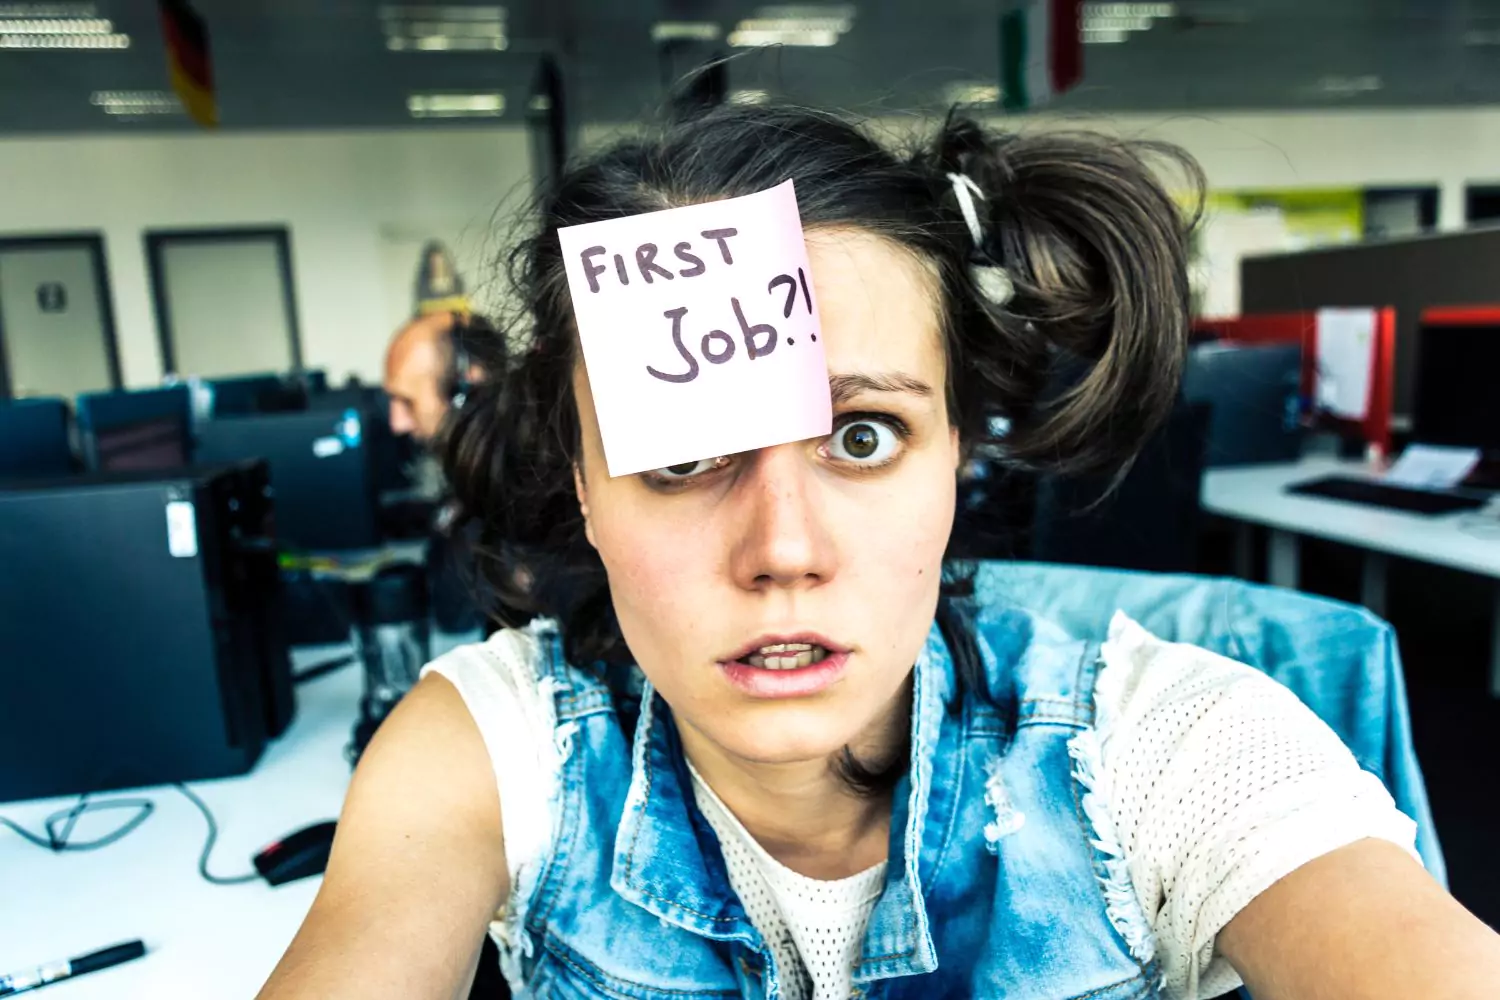 Ready for the Real World: What if I Don’t Like My First Job?